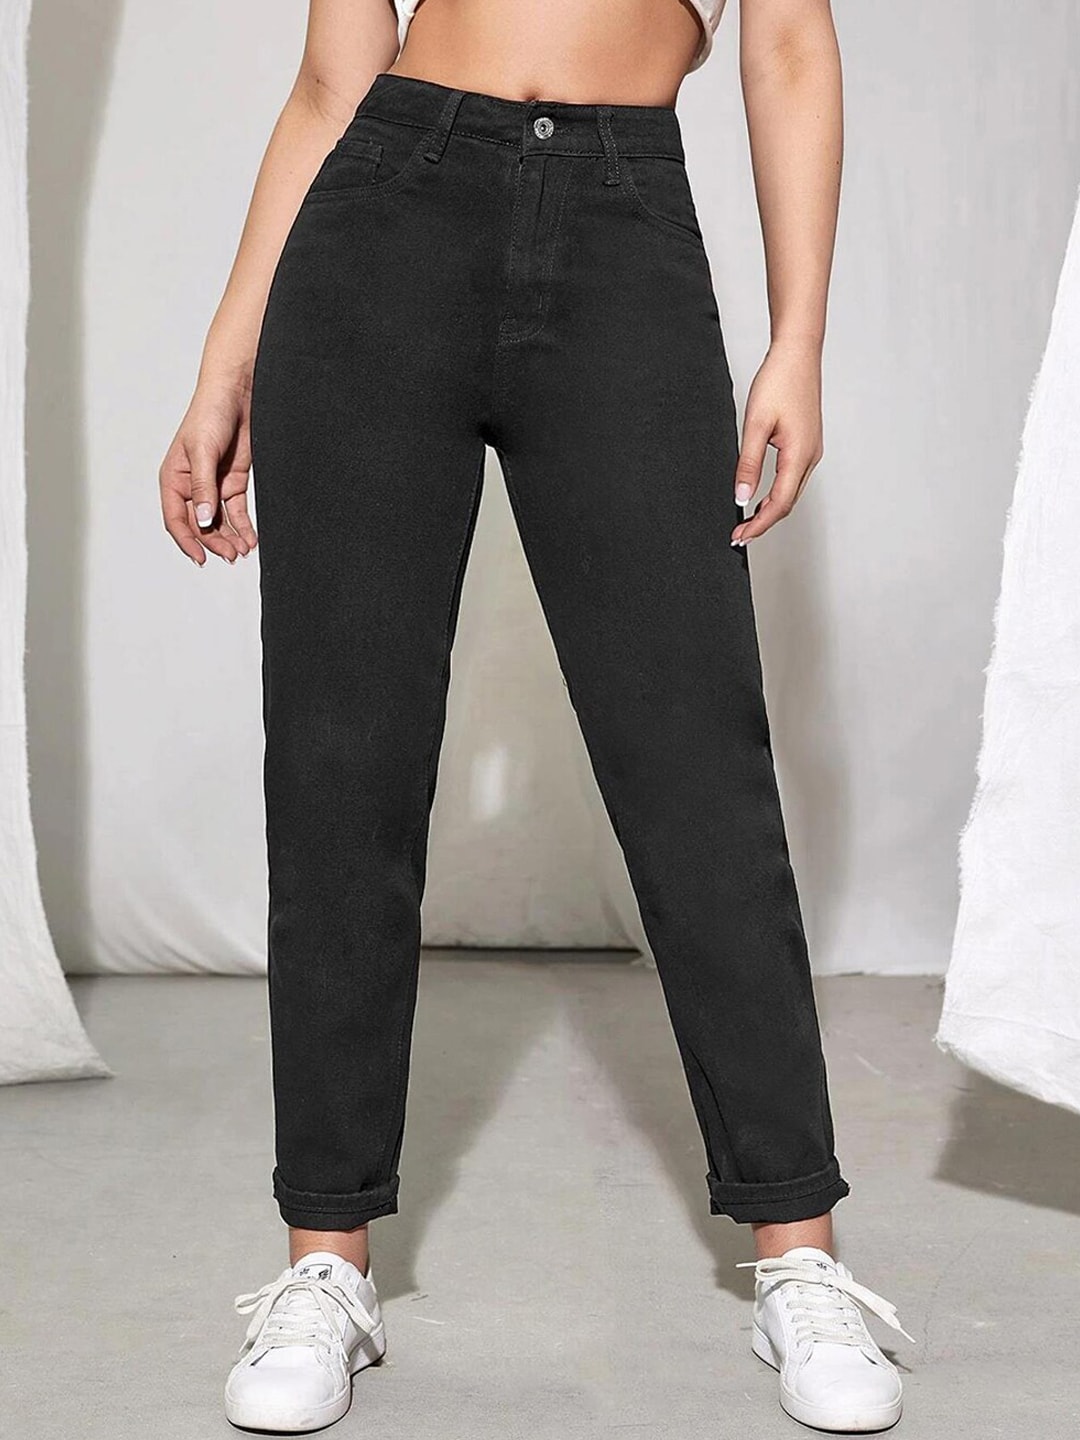 Kotty Women Black Jean Slim Fit Stretchable Jeans Price in India